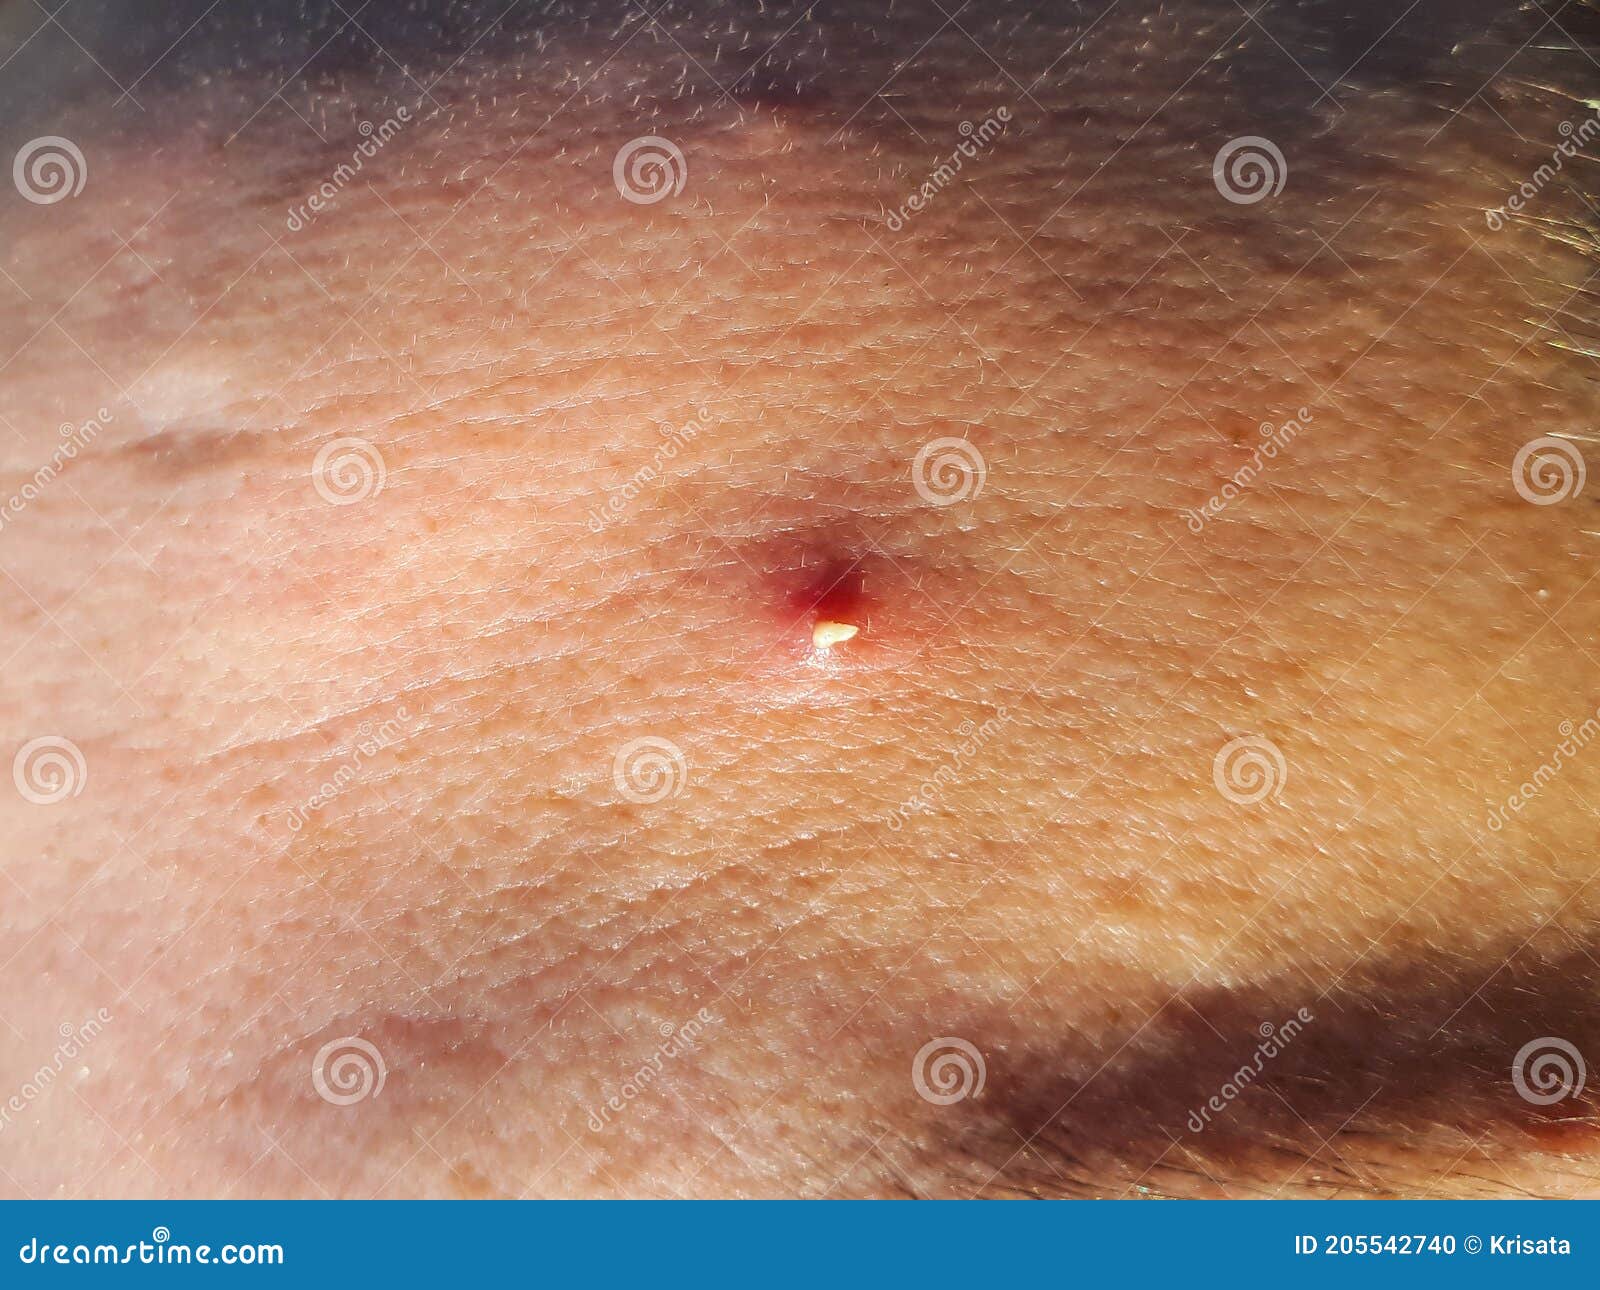 Smag Vittig høste Red Pimple with White Pus Squeezed Out on Tanned Mature Skin Stock Photo -  Image of adolescent, furuncle: 205542740